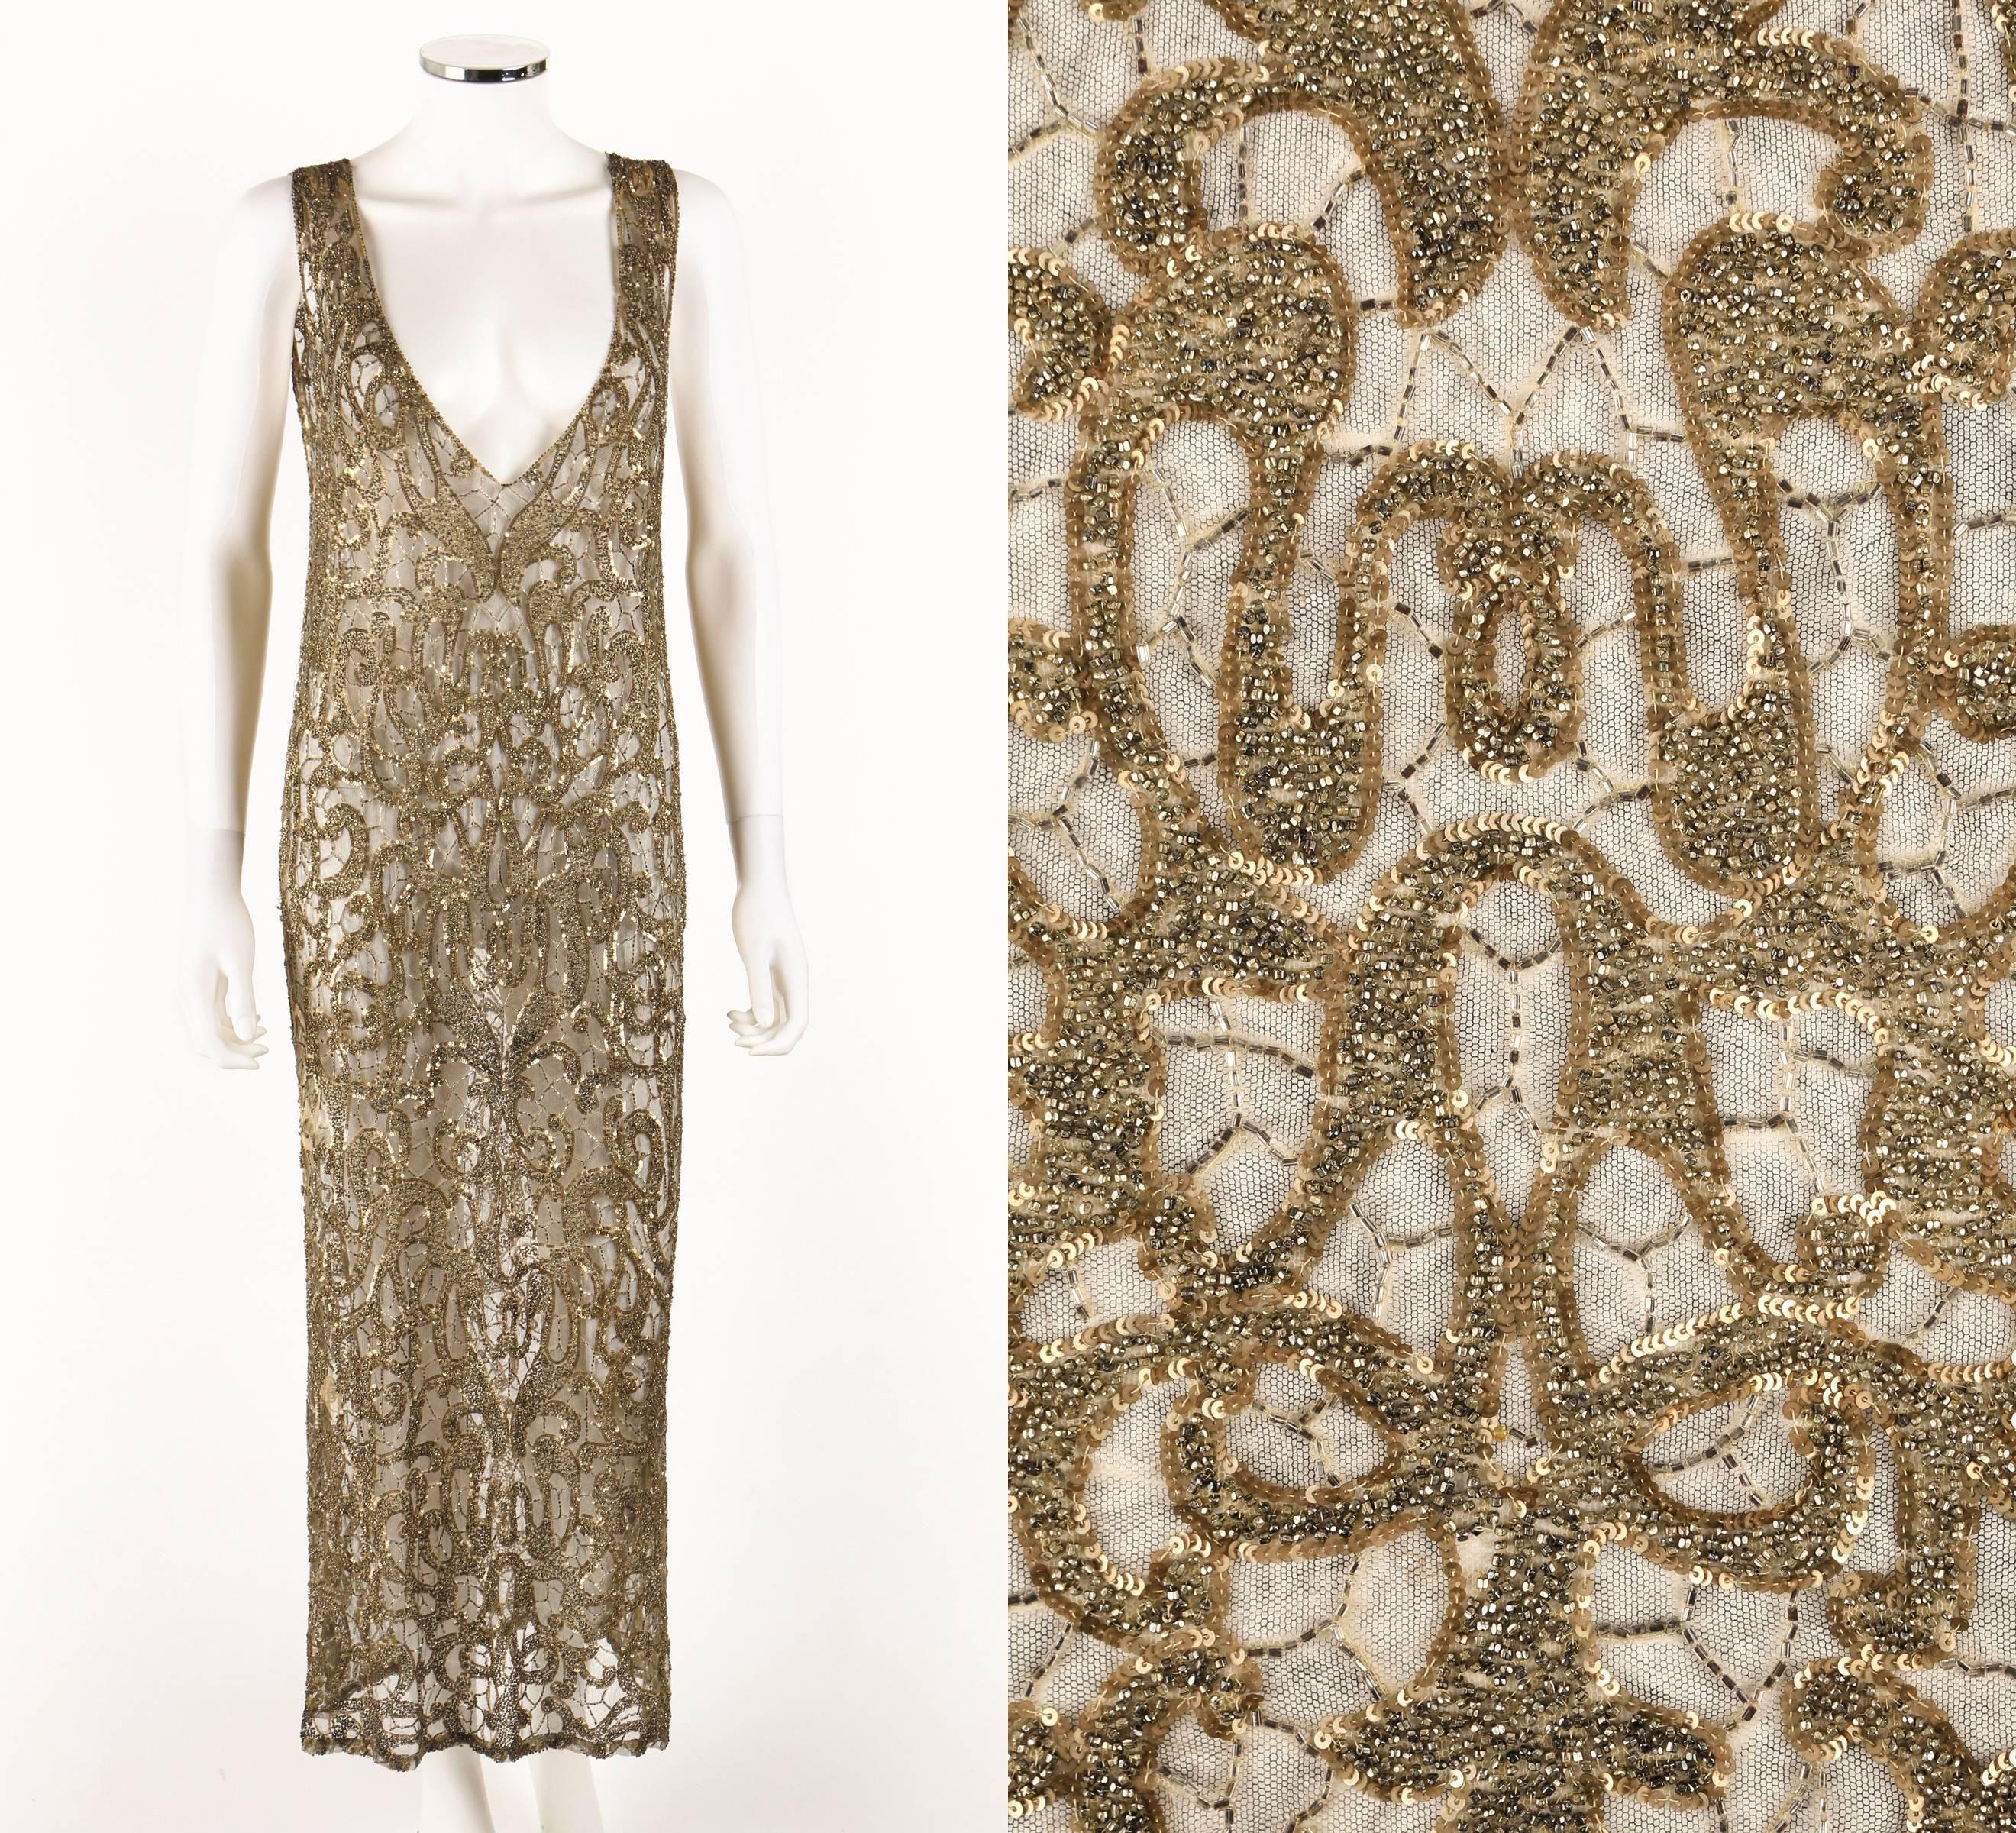 Couture (one of a kind) 1920's gold (with greying hues - offering a rich platinum / gold look) sequin beaded net evening dress. Elegant art deco bead and sequin pattern. Sleeveless. Plunging front and back neckline. Side seam slits. Slip on.